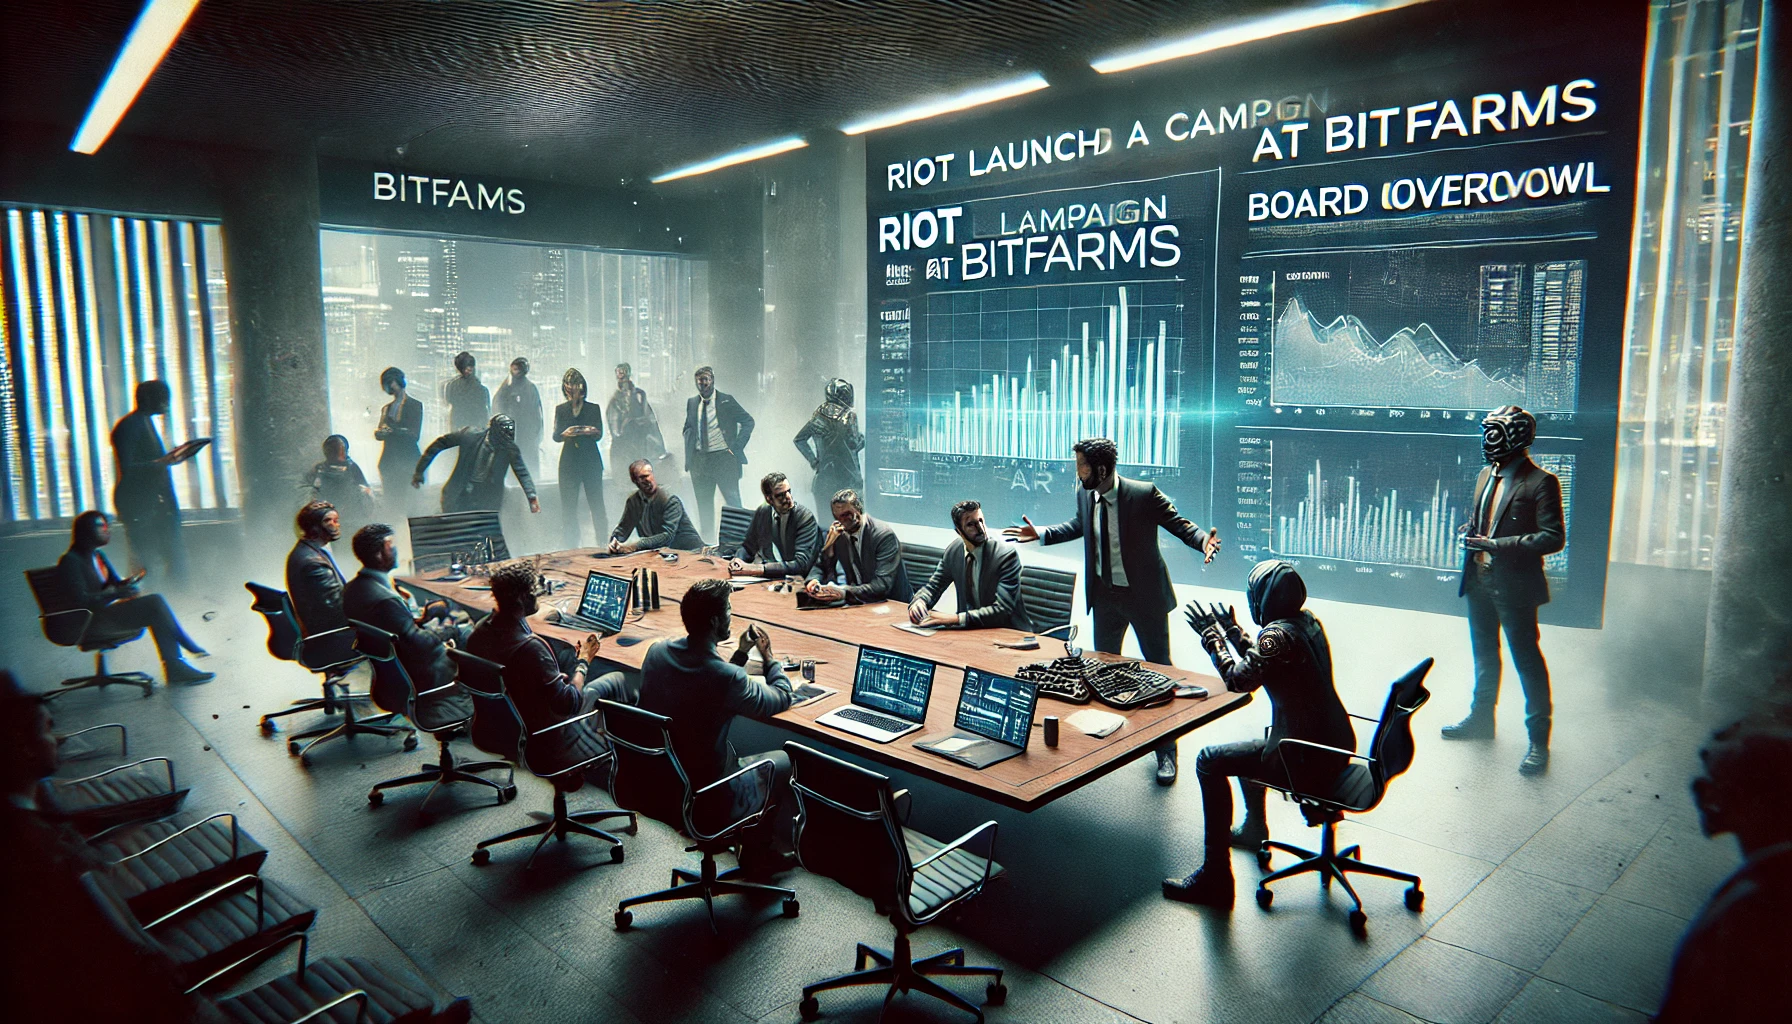 Riot Launches Campaign for Board Overhaul at Bitfarms